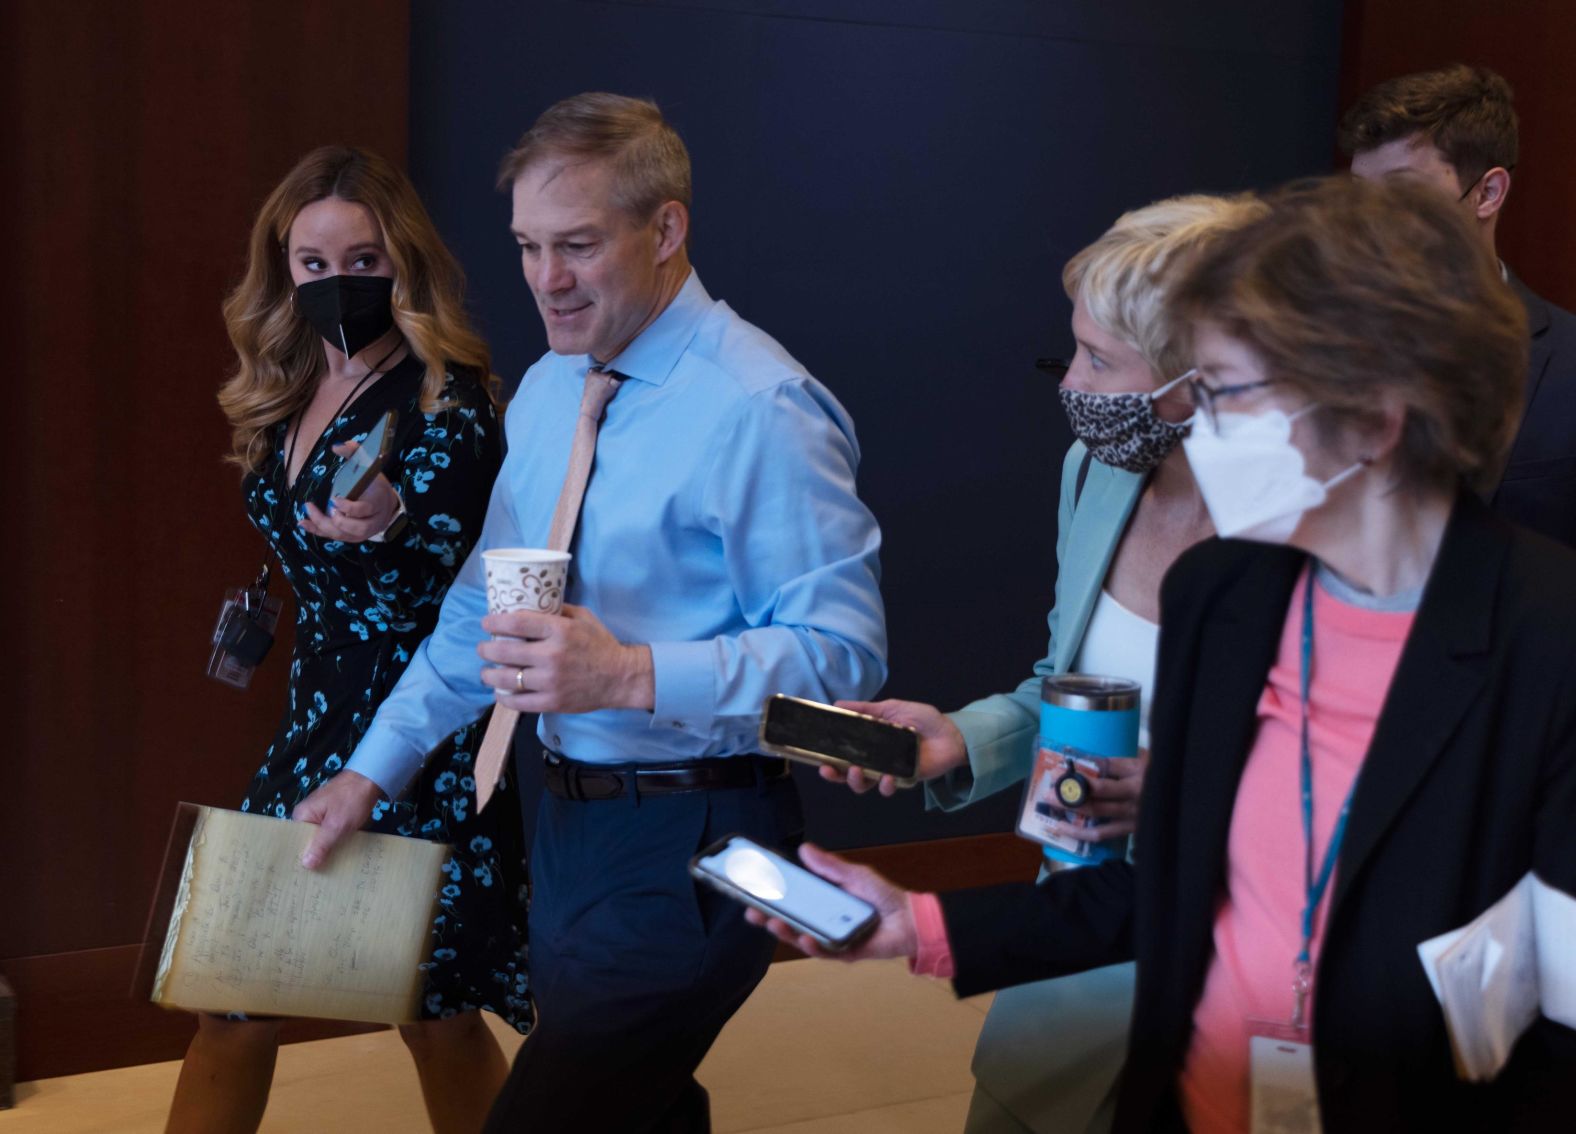 Reporters talk to US Rep. Jim Jordan, a fierce defender of former President Donald Trump, before House Republicans voted out Cheney as chairwoman of the House Republican Conference.